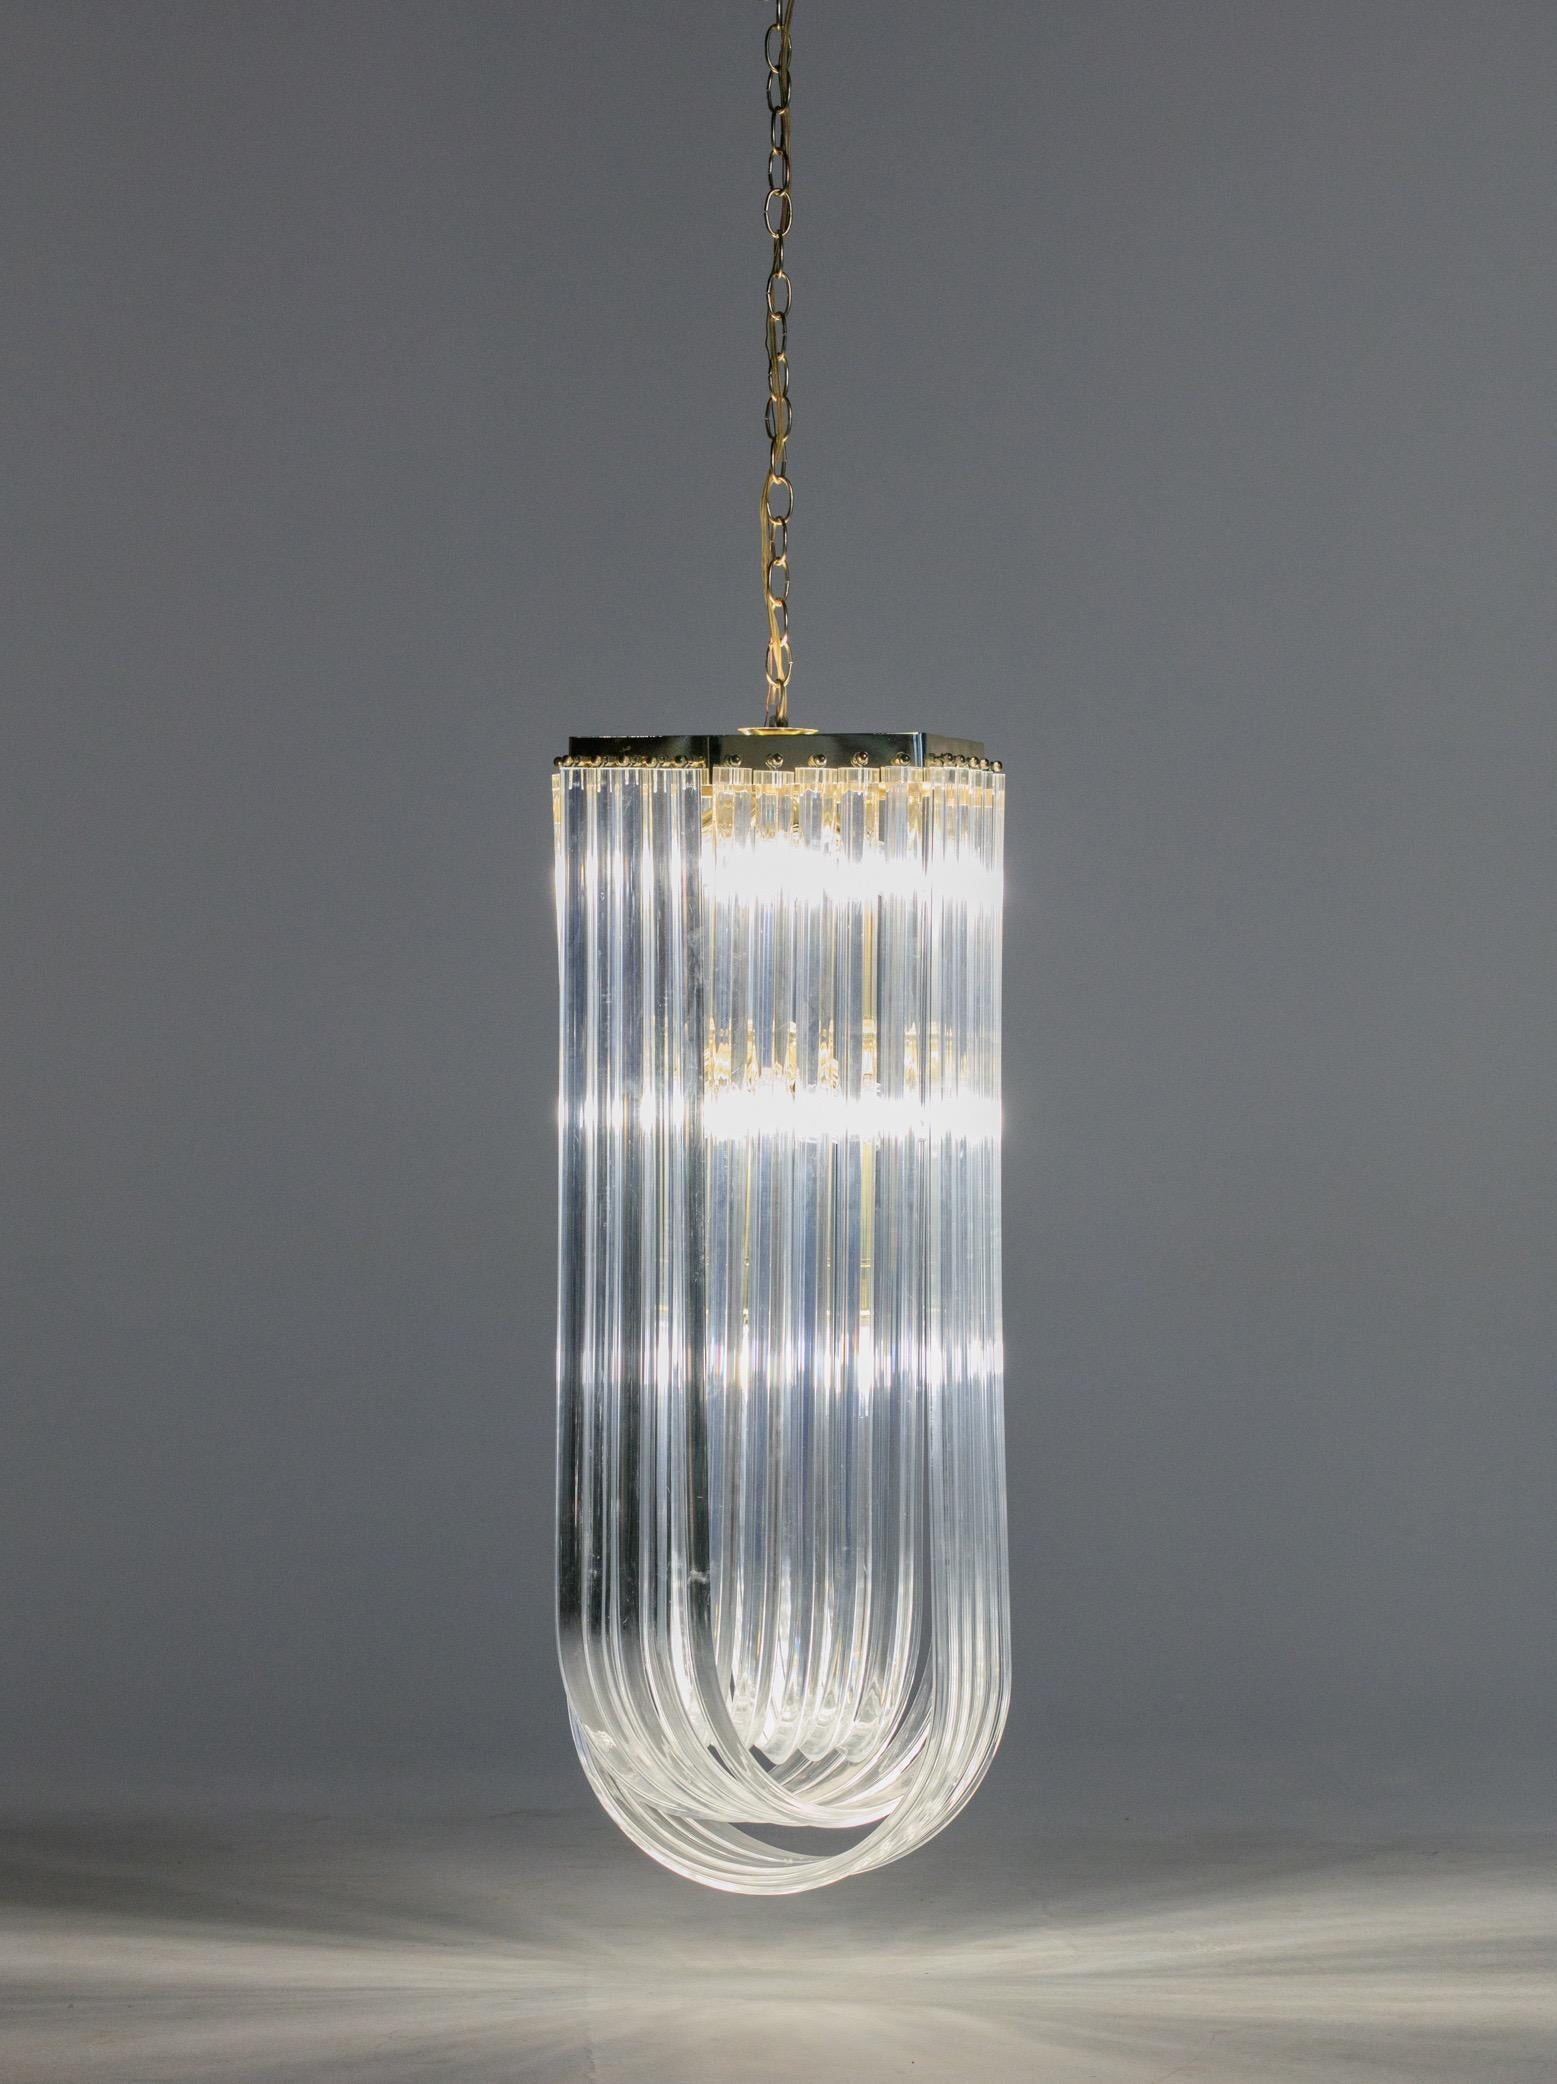 Extra Large Sculptural Lucite and Brass Chandelier, circa 1970s For Sale 8